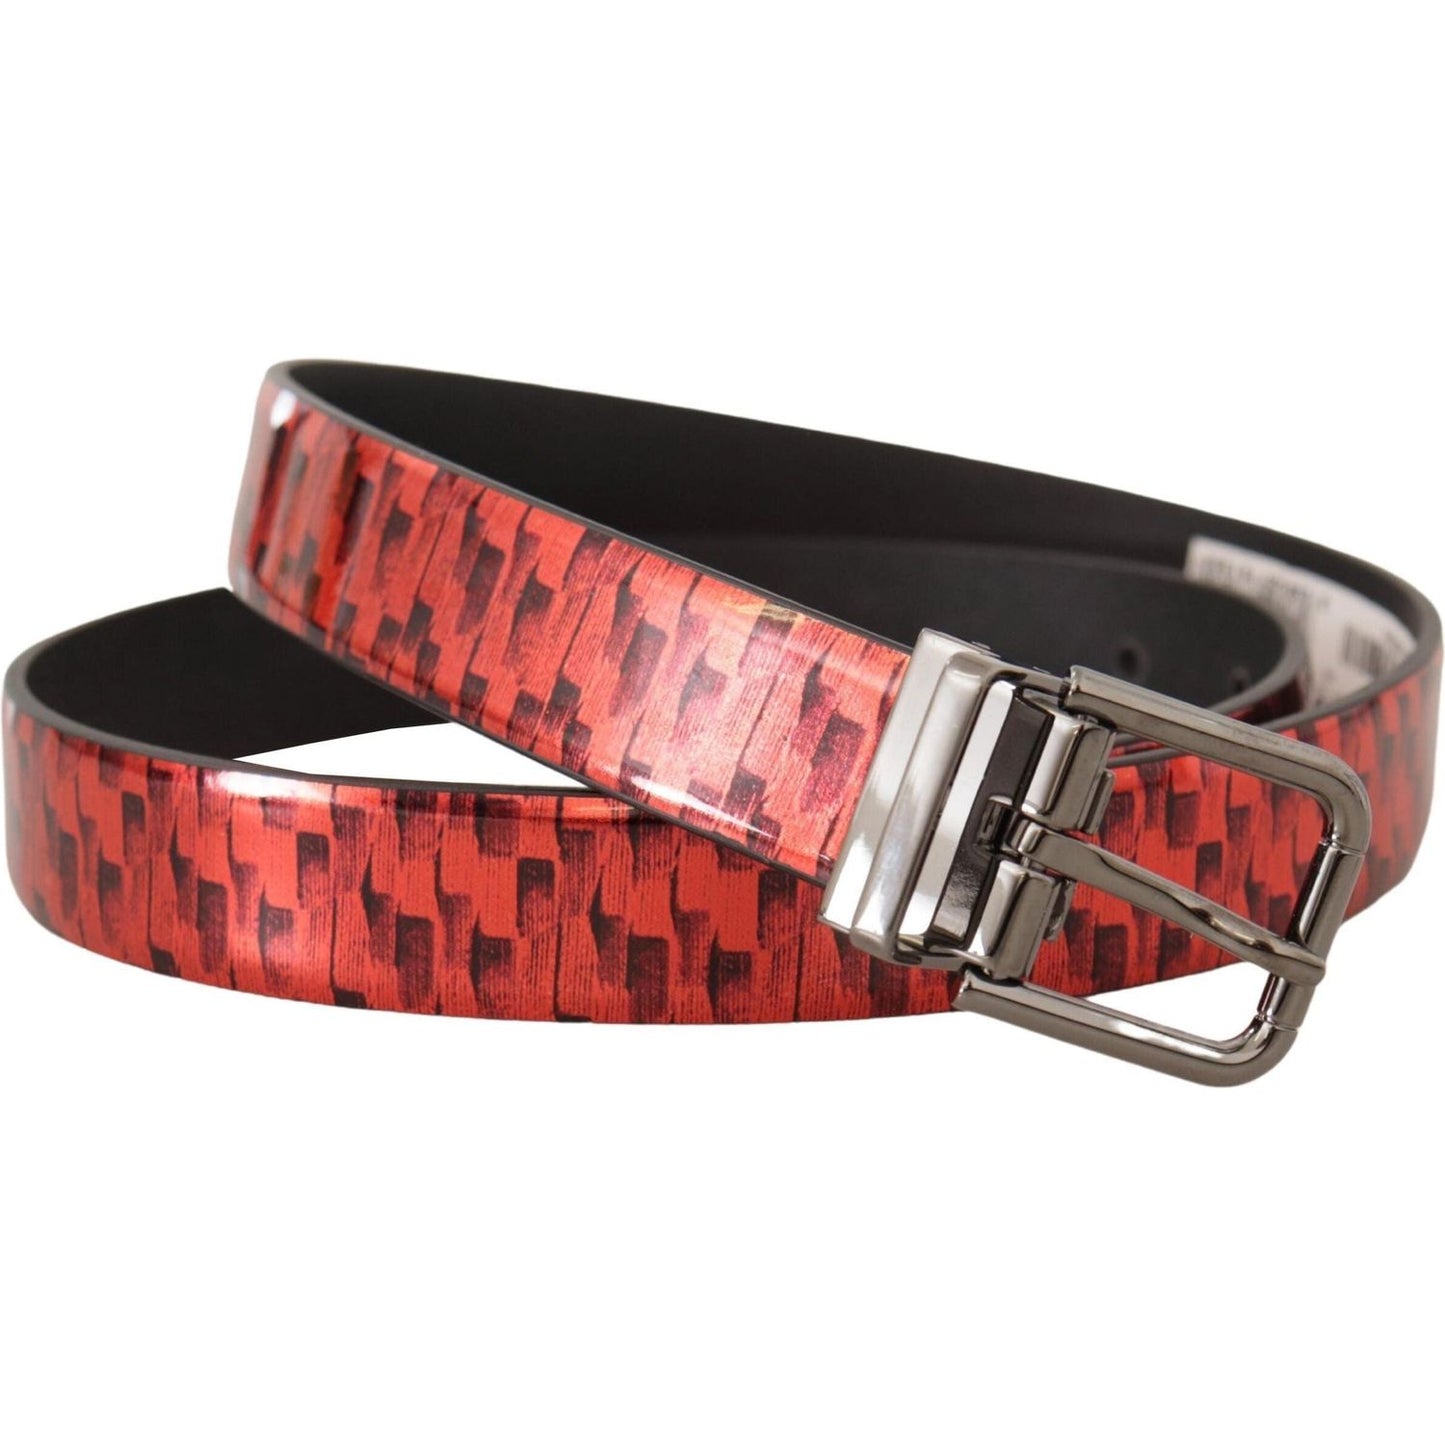 Elegant Red Leather Belt with Silver Buckle Dolce & Gabbana